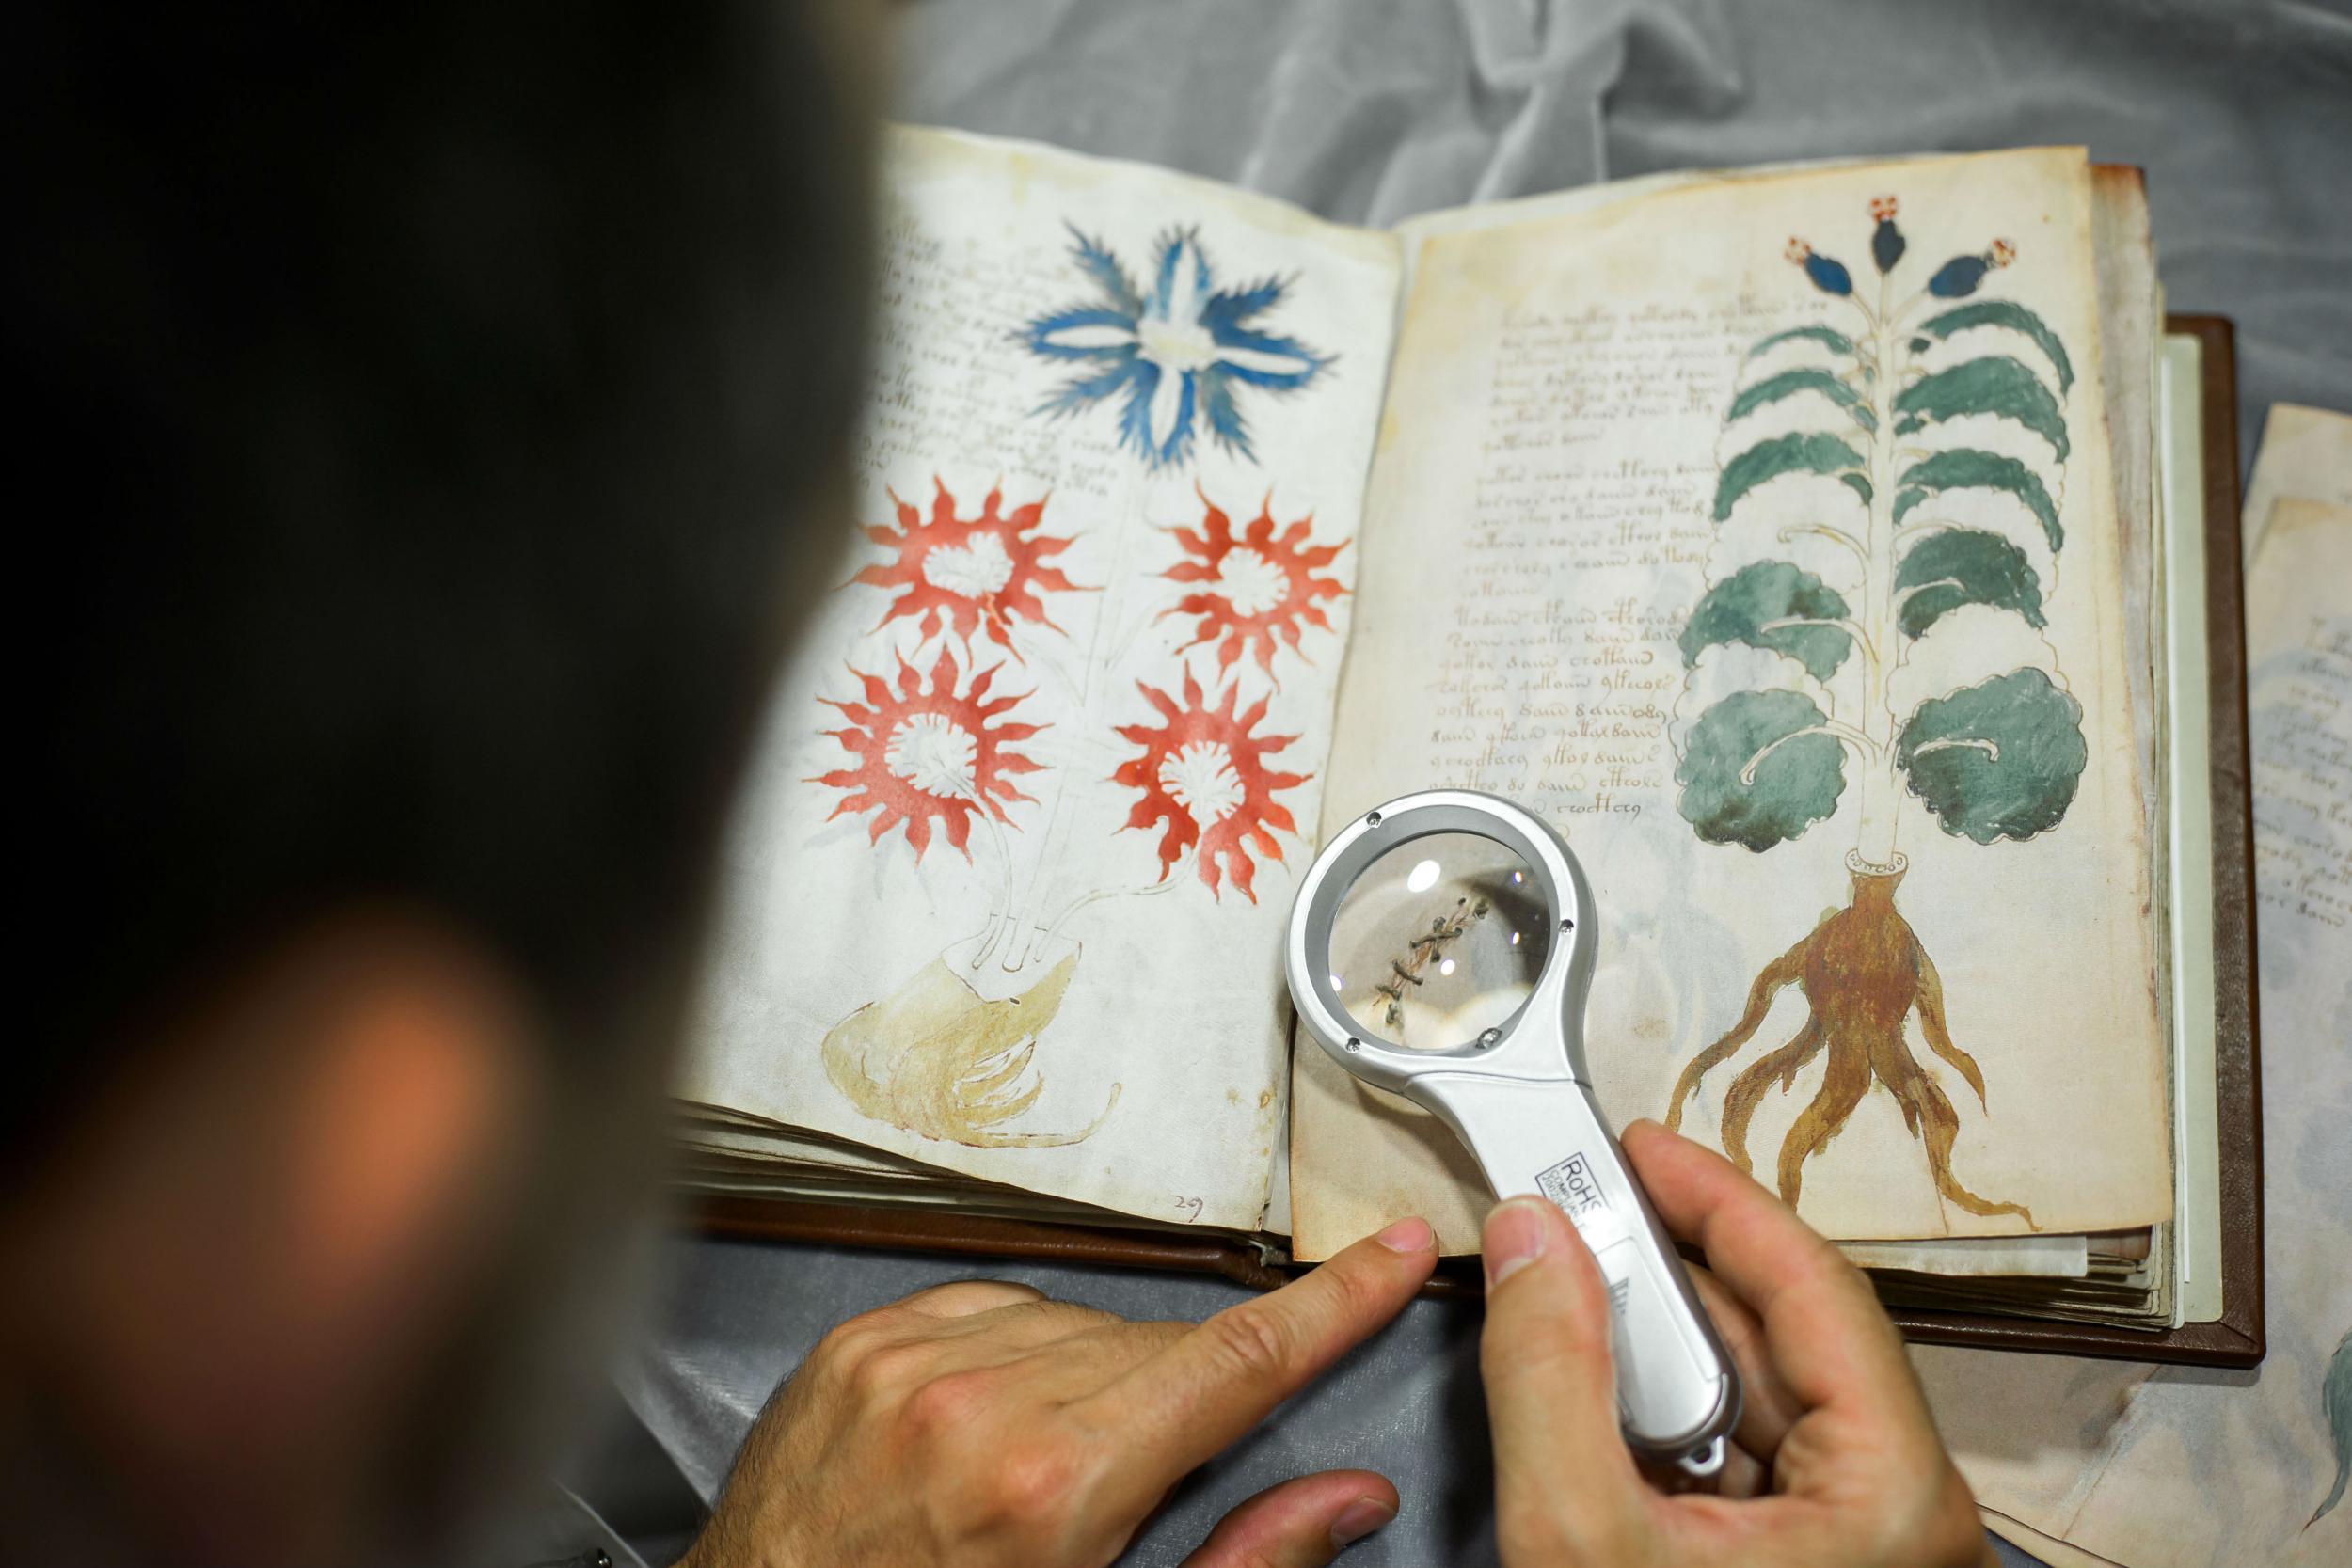 Trying to grasp the meaning of the Voynich Manuscript